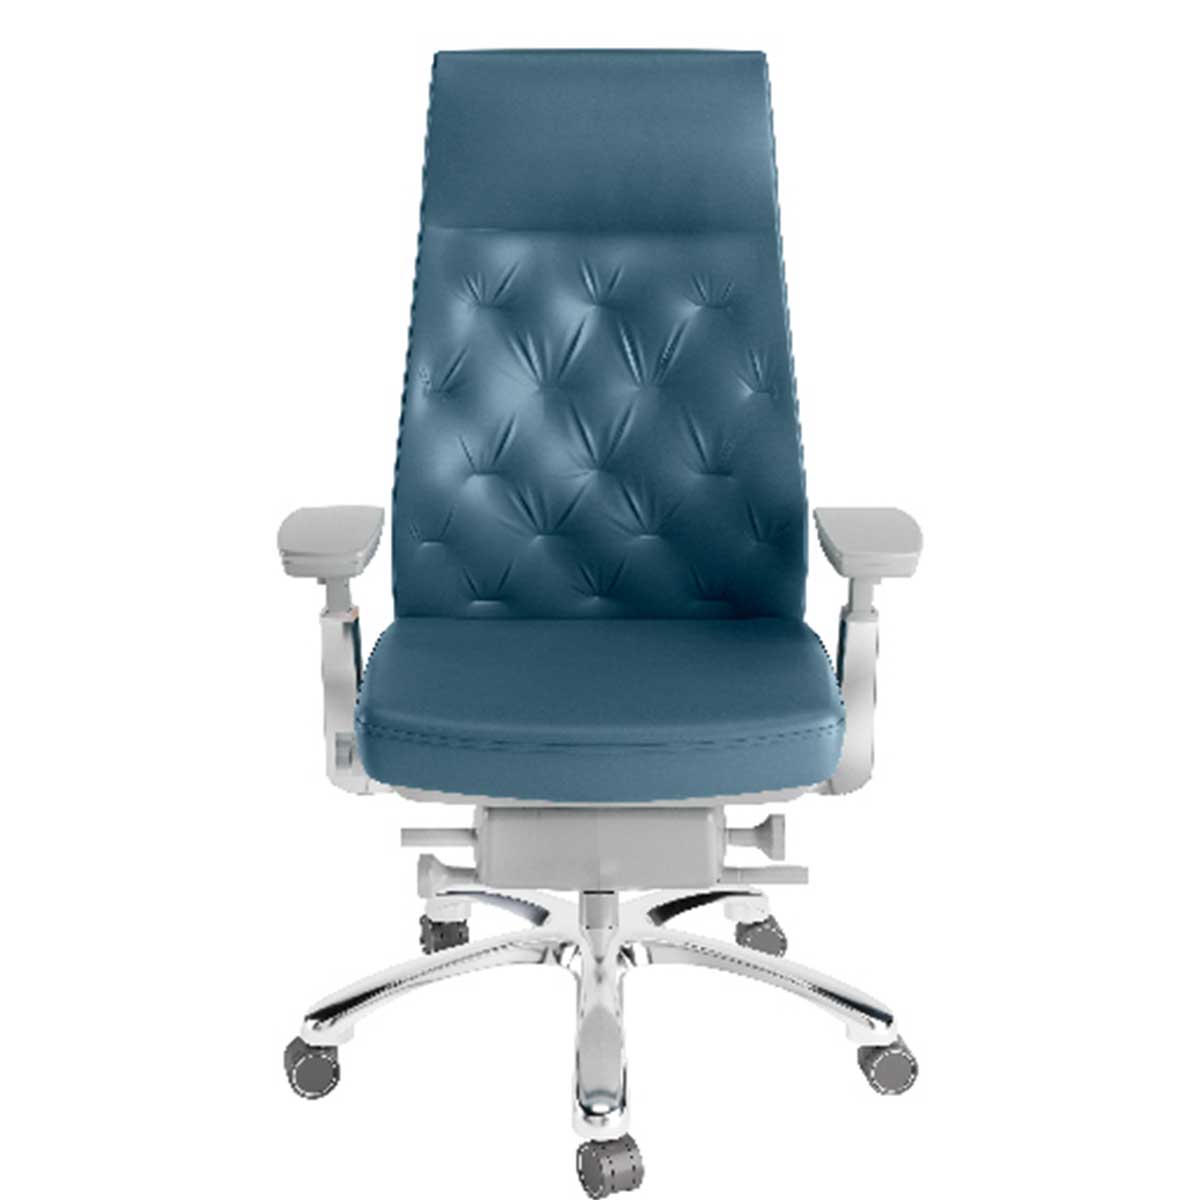 Boss Chair Manufacturers, Suppliers in Dwarka Sector 27